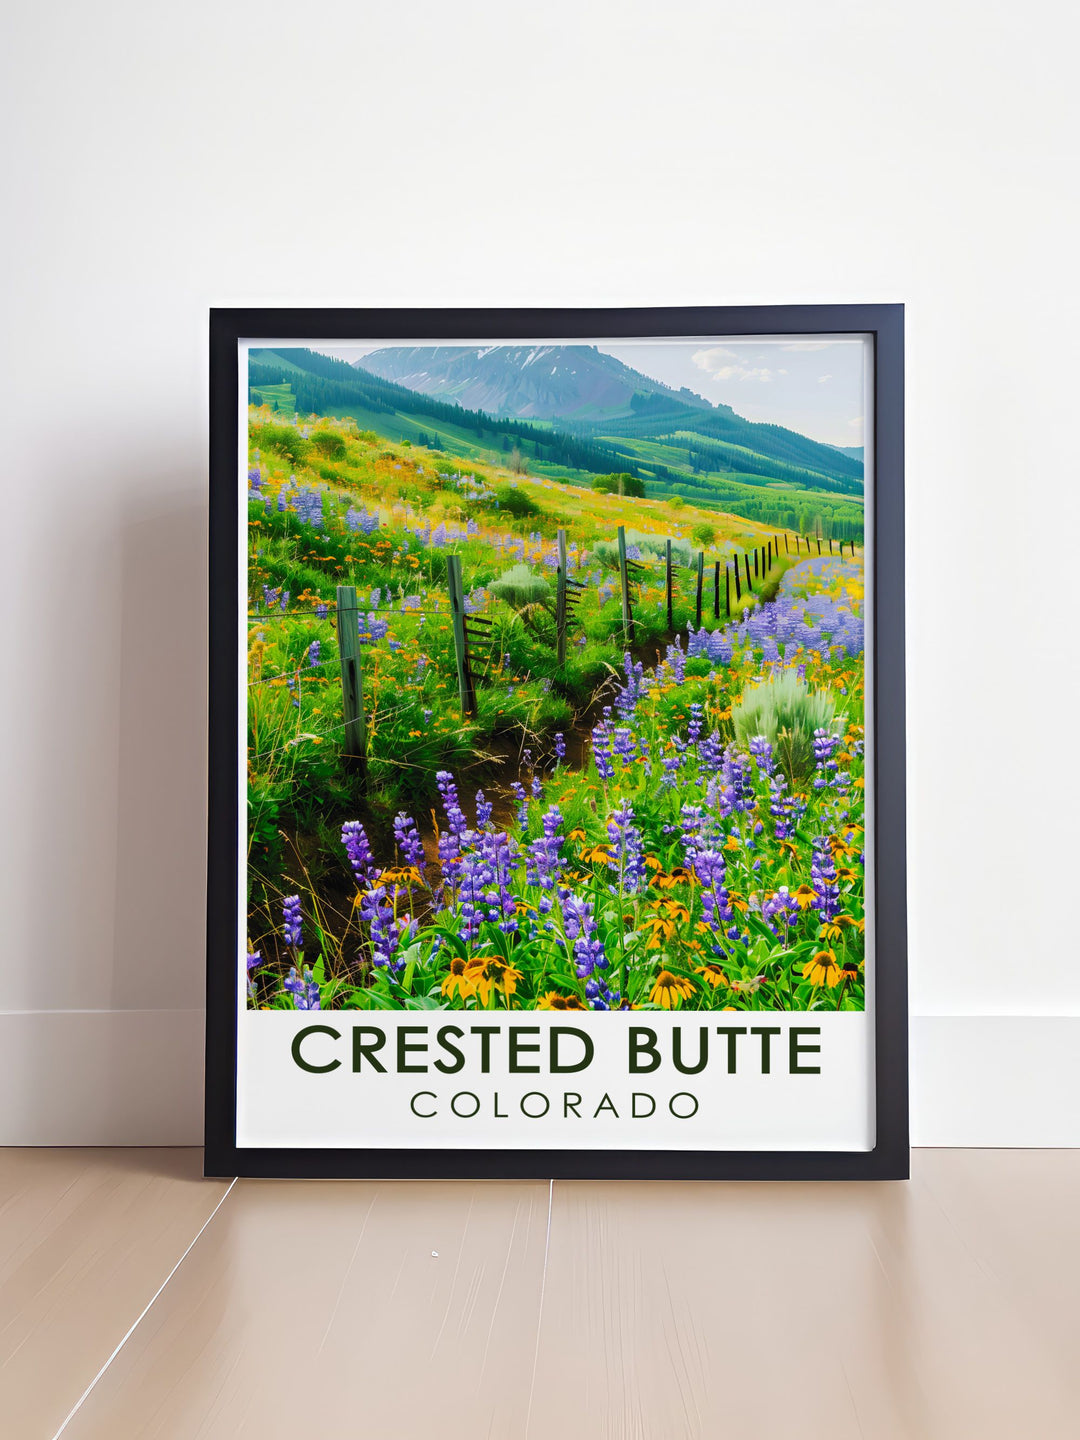 Unique Wildflower Festival artwork from Crested Butte featuring intricate illustrations of the festivals vibrant wildflowers and stunning mountain scenery perfect for adding a touch of Colorados charm to your living space.